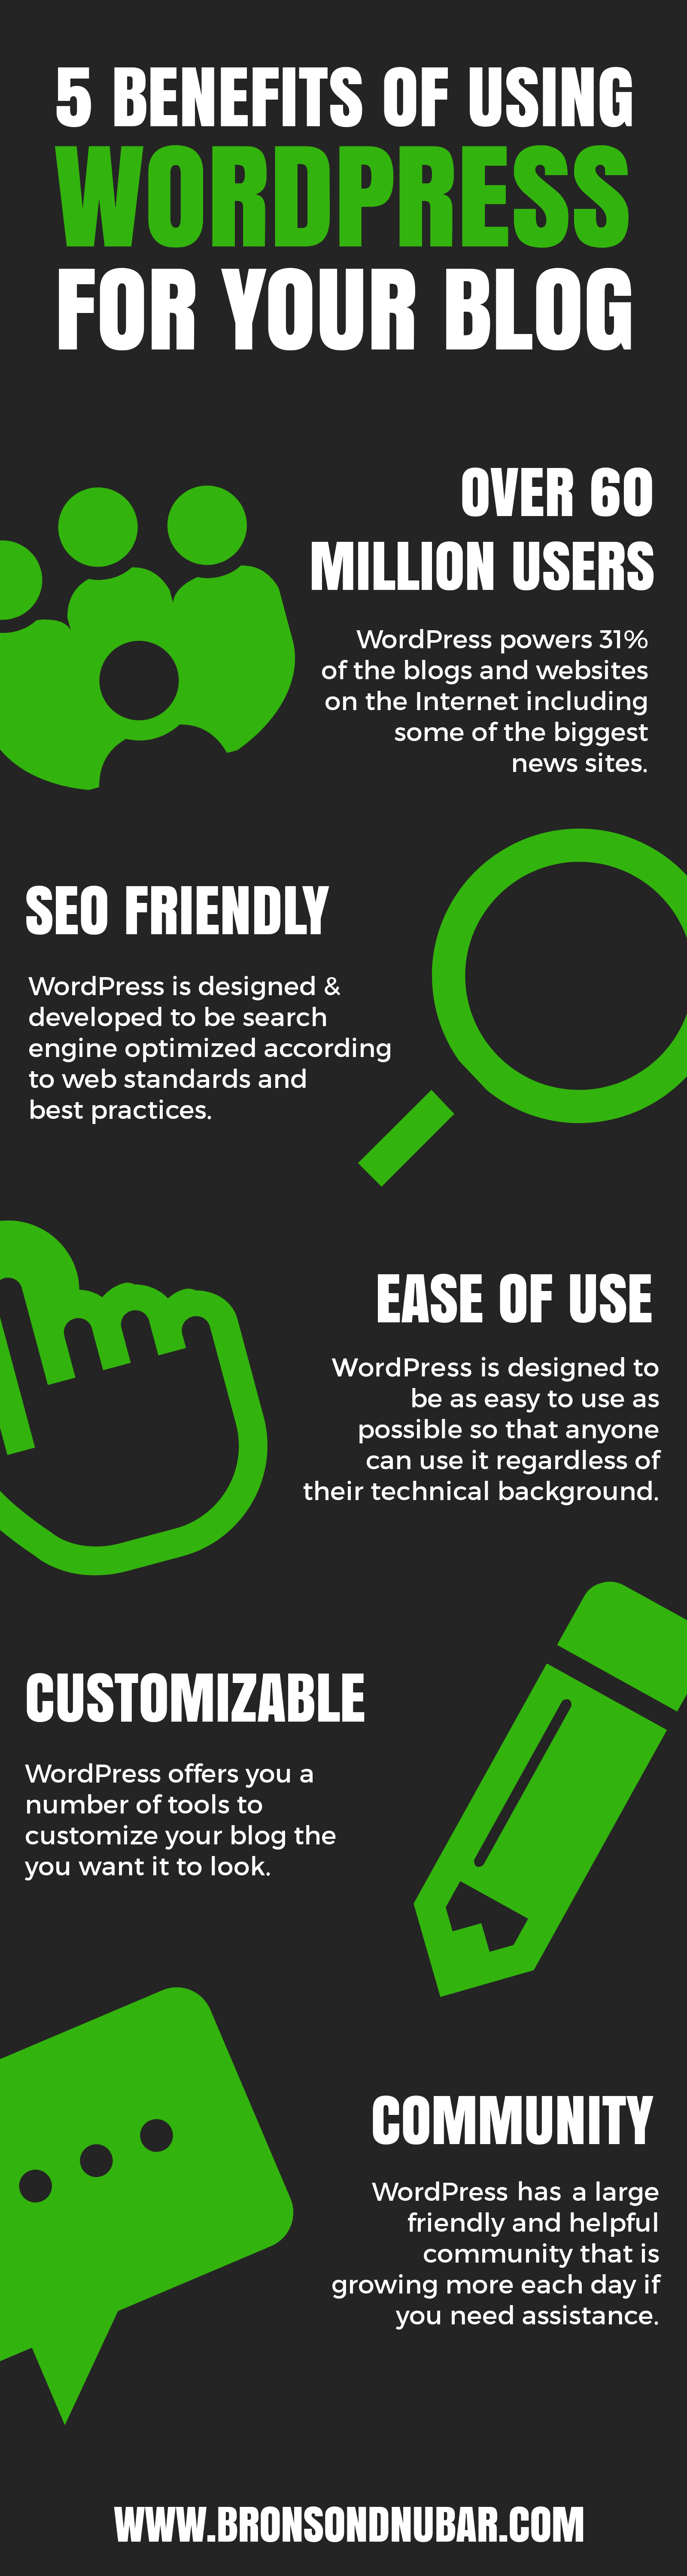 5 Benefits of using WordPress for your blog [infographic]